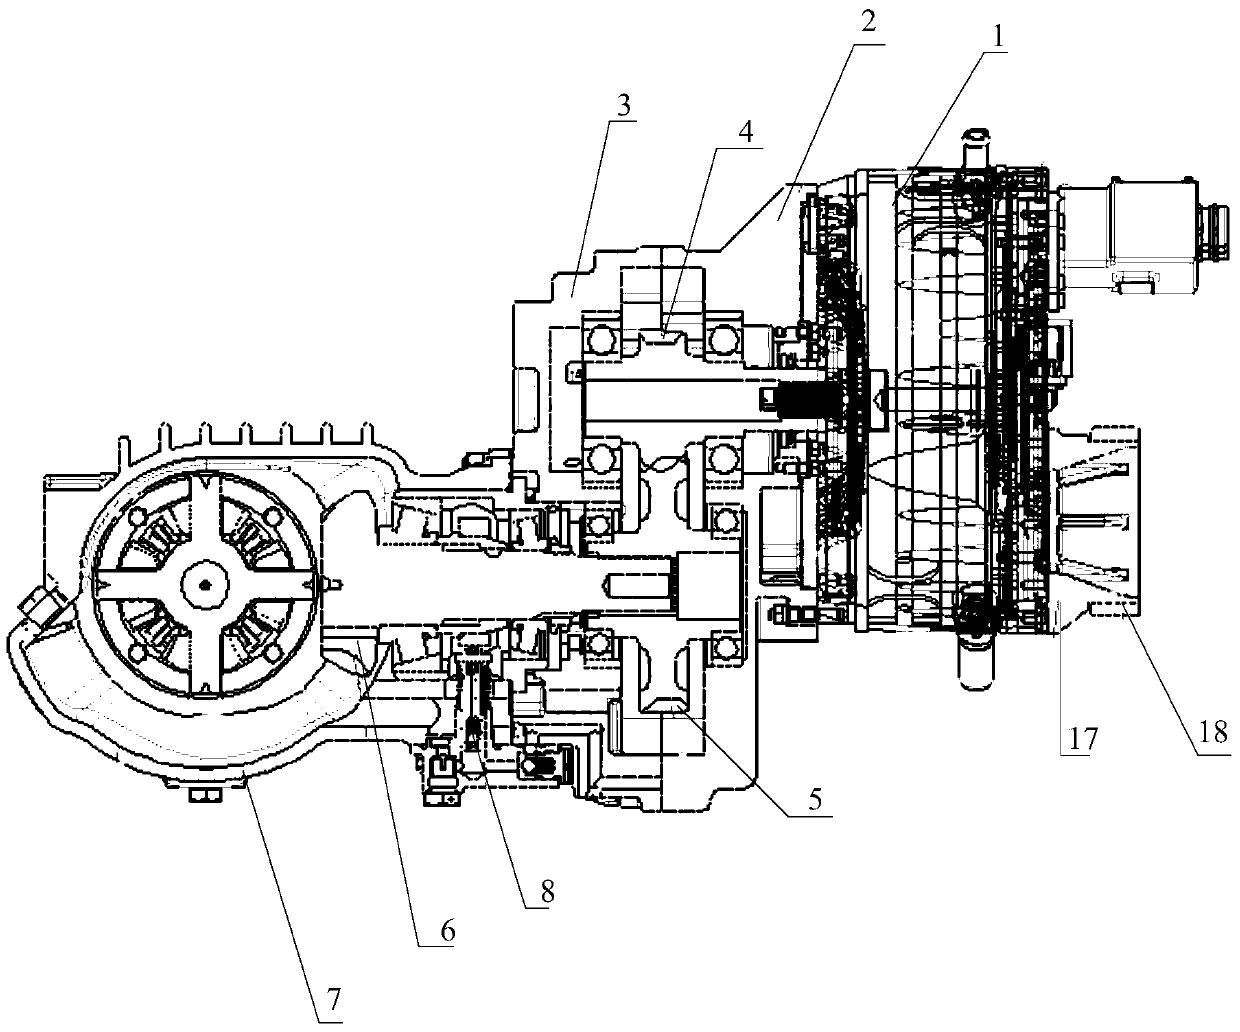 A disconnected drive axle main reducer assembly